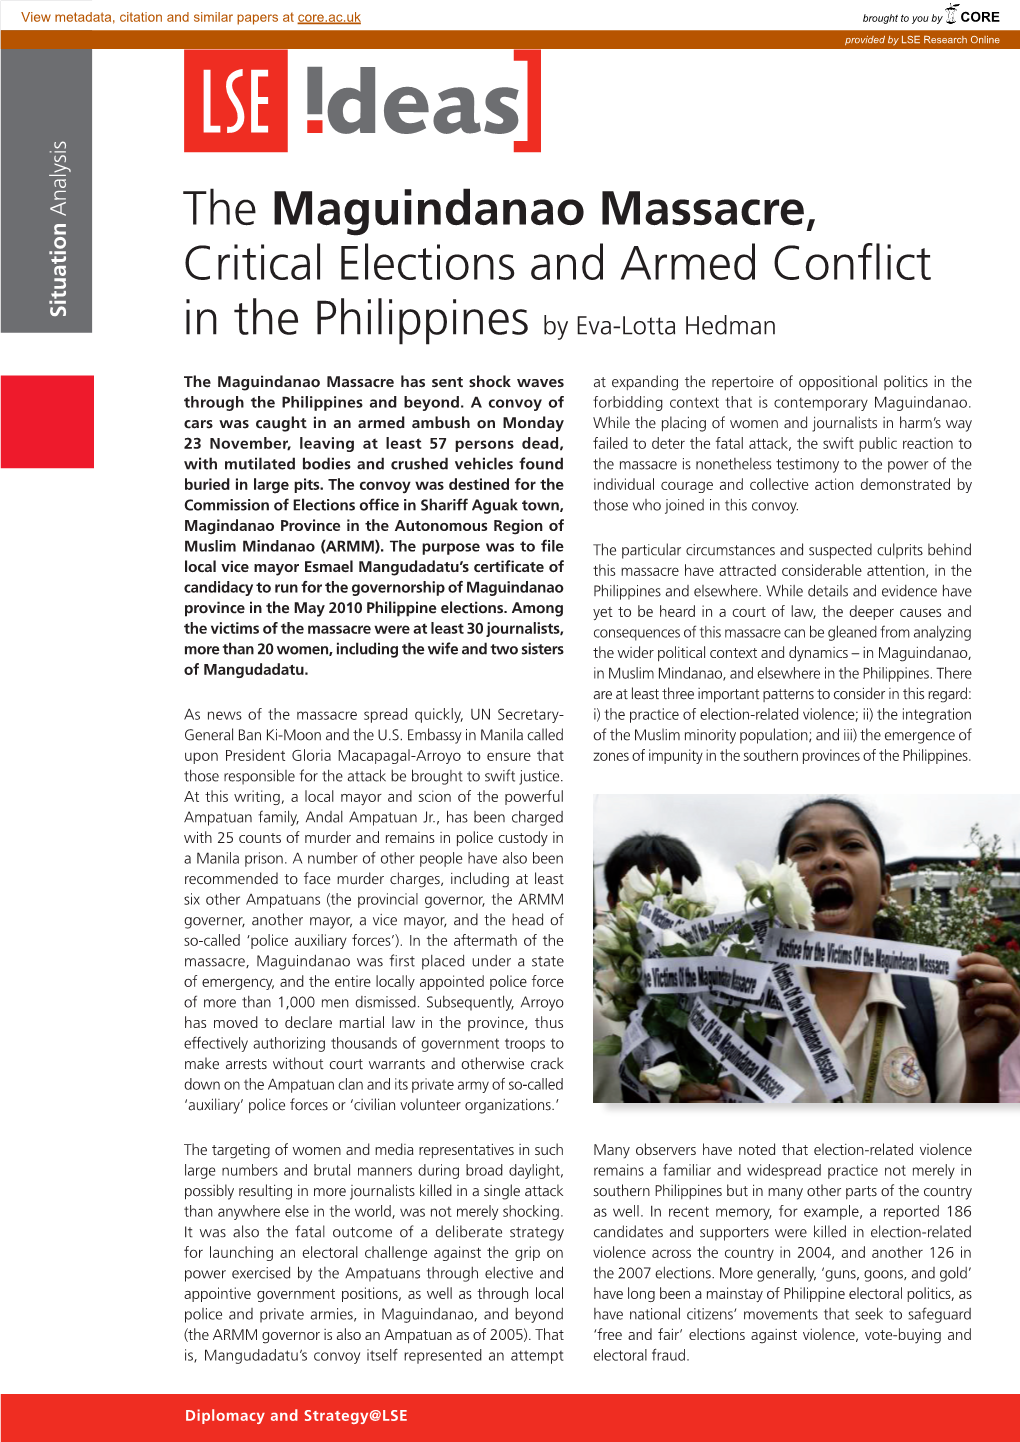 Maguindanao Massacre, Critical Elections and Armed Conflict Situation in the Philippines by Eva-Lotta Hedman